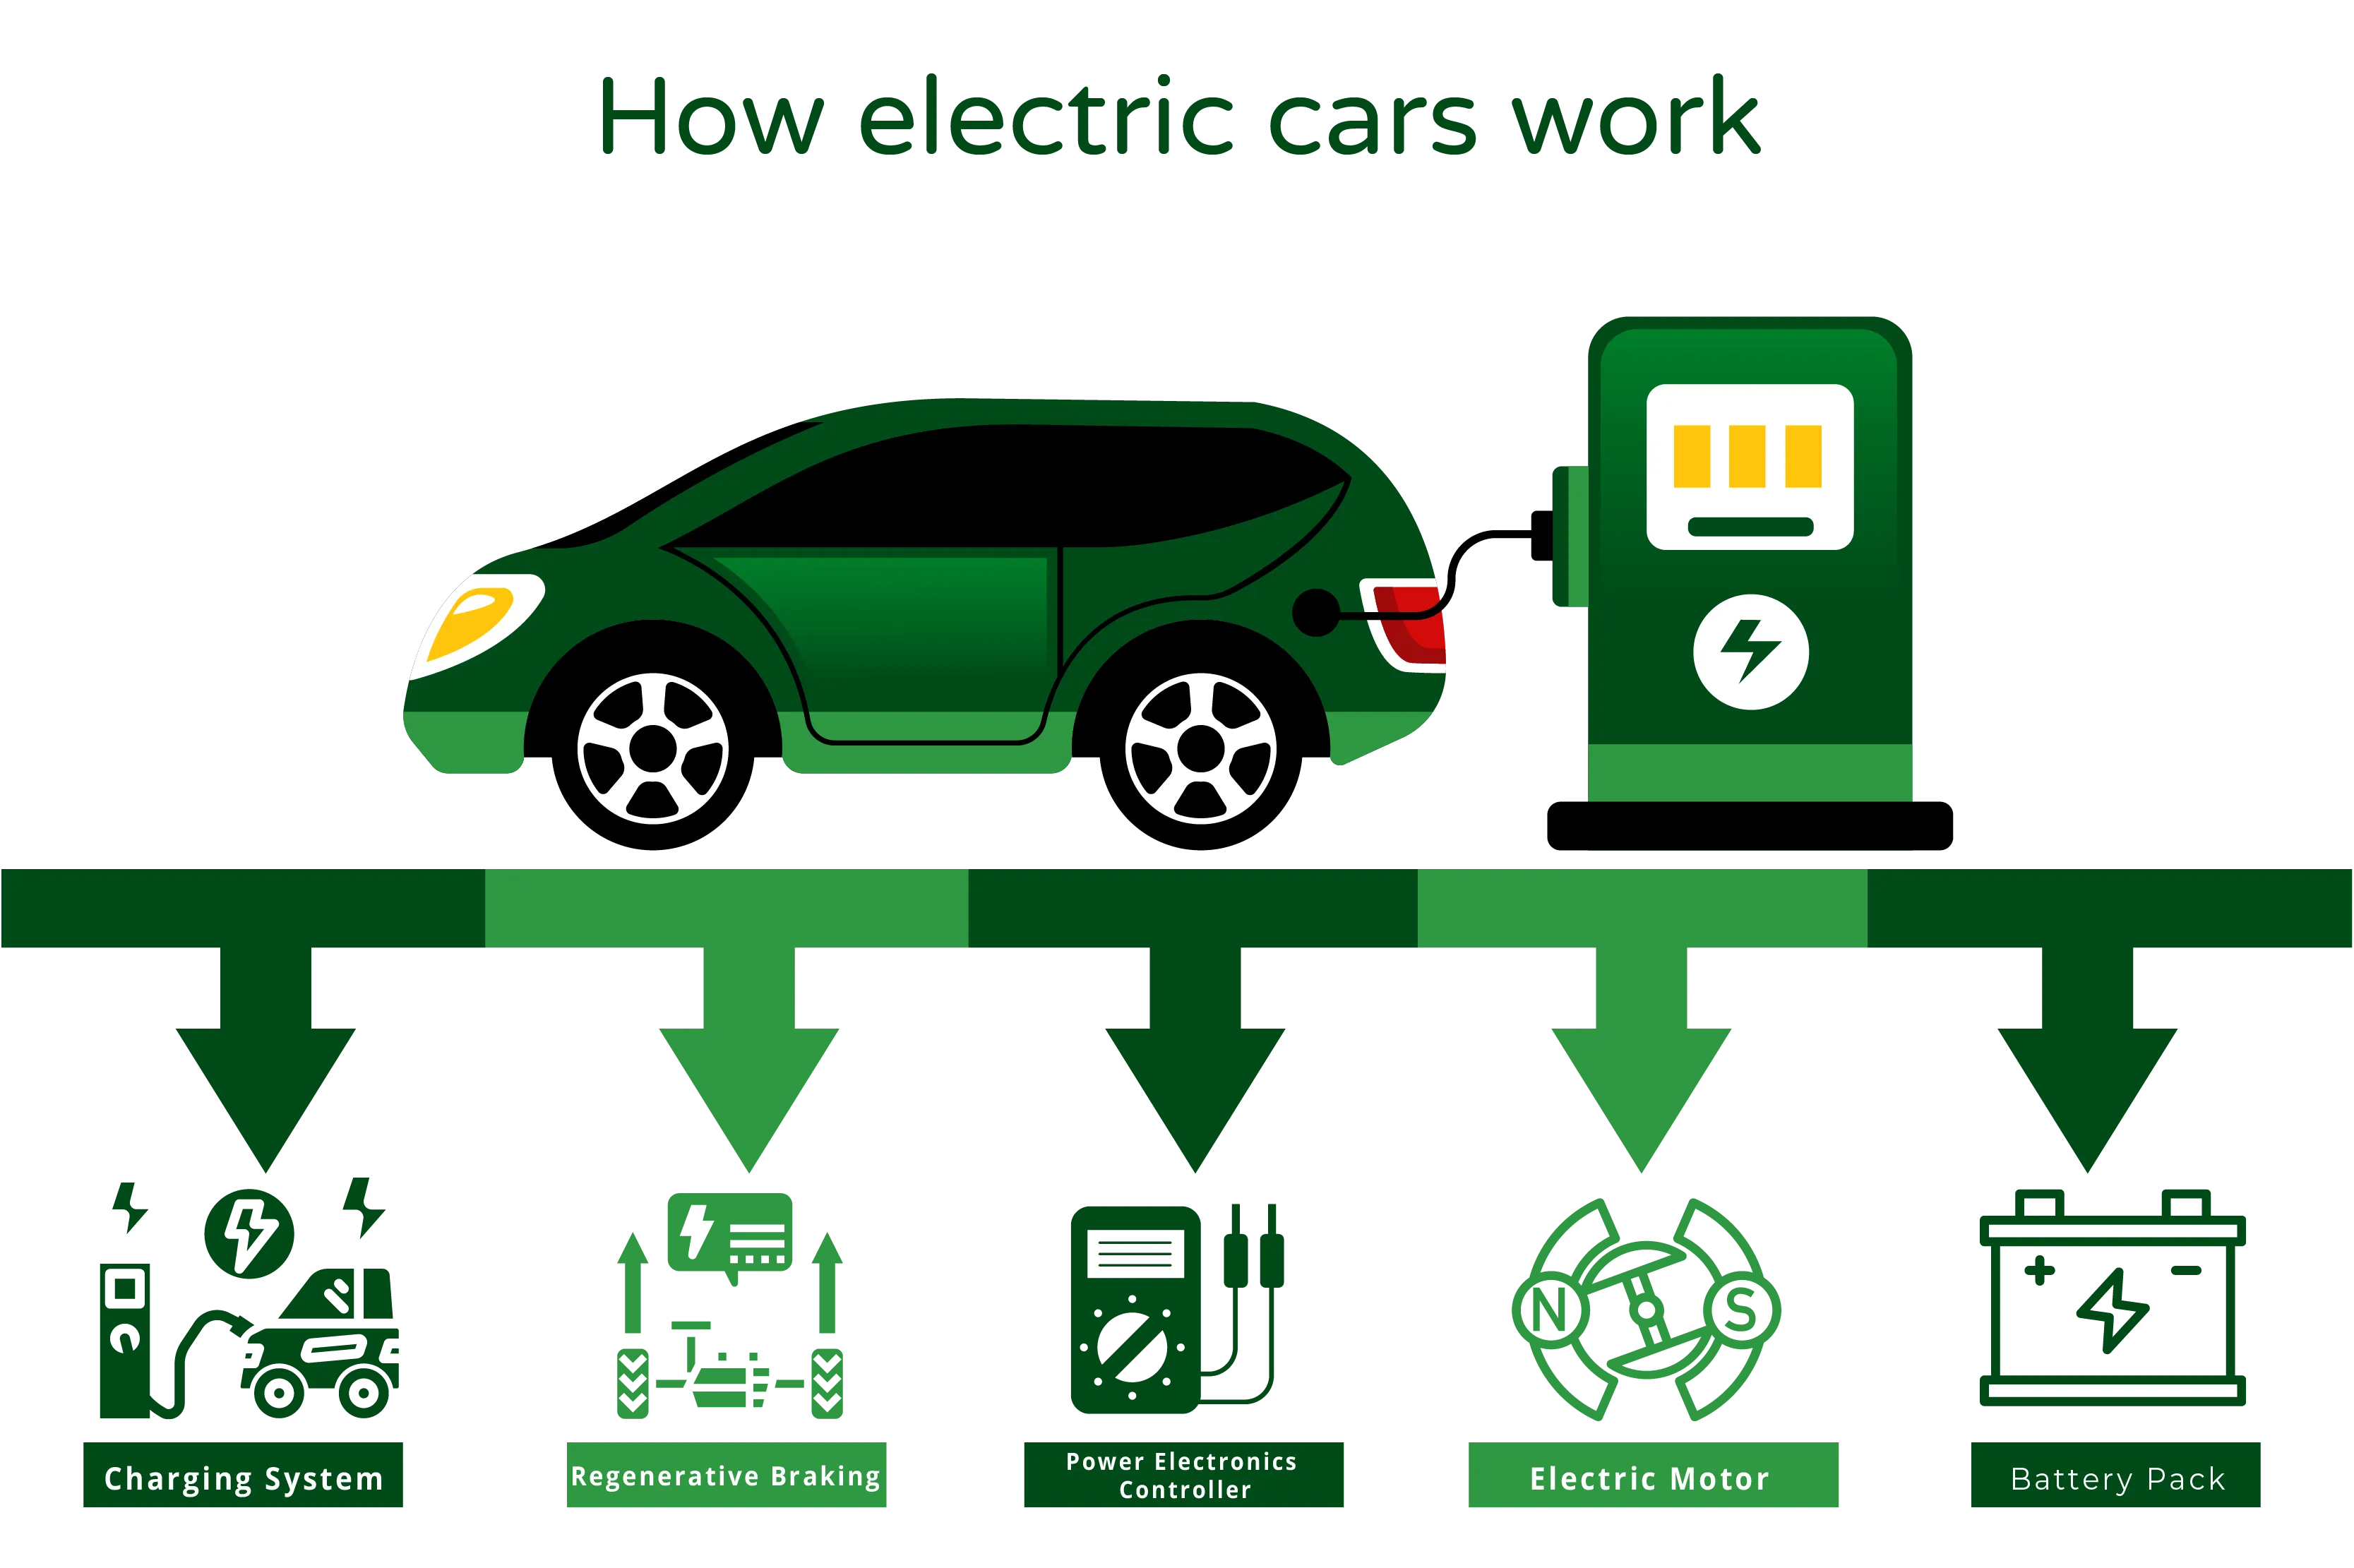 Illustration titled 'How Electric Cars Work.' The image showcases an electric car, accompanied by five graphical representations depicting the key components and functions of electric vehicles.  Battery Pack: Represented by a symbol, it signifies the large battery pack in electric vehicles that stores electrical energy. Typically, lithium-ion batteries are used due to their high energy density and long lifespan.  Electric Motor: Depicted with a symbol, it symbolizes the motor that converts electrical energy into mechanical energy to drive the car's wheels. Electric motors are highly efficient and deliver instant torque, resulting in quick acceleration.  Power Electronics Controller: Represented by a symbol, it represents the controller responsible for regulating the flow of electricity between the battery pack and the motor. It ensures the optimal amount of power is supplied to the motor for efficient performance.  Regenerative Braking: Depicted with a symbol, it represents the process of regenerative braking in electric cars. It captures the energy generated during braking and converts it back into electricity, which is then stored in the battery pack, enhancing the vehicle's overall efficiency.  Charging System: Represented by a symbol, it signifies the charging infrastructure used by electric cars. This can include charging stations or standard household electrical outlets, where the vehicle connects to recharge its battery. Charging times vary based on the infrastructure and battery capacity.  The illustration visually presents the functioning of electric cars, highlighting the role of the battery pack, electric motor, power electronics controller, regenerative braking, and charging system in enabling their operation. It aims to provide an overview of how electric vehicles work, emphasizing their efficiency and eco-friendly characteristics.